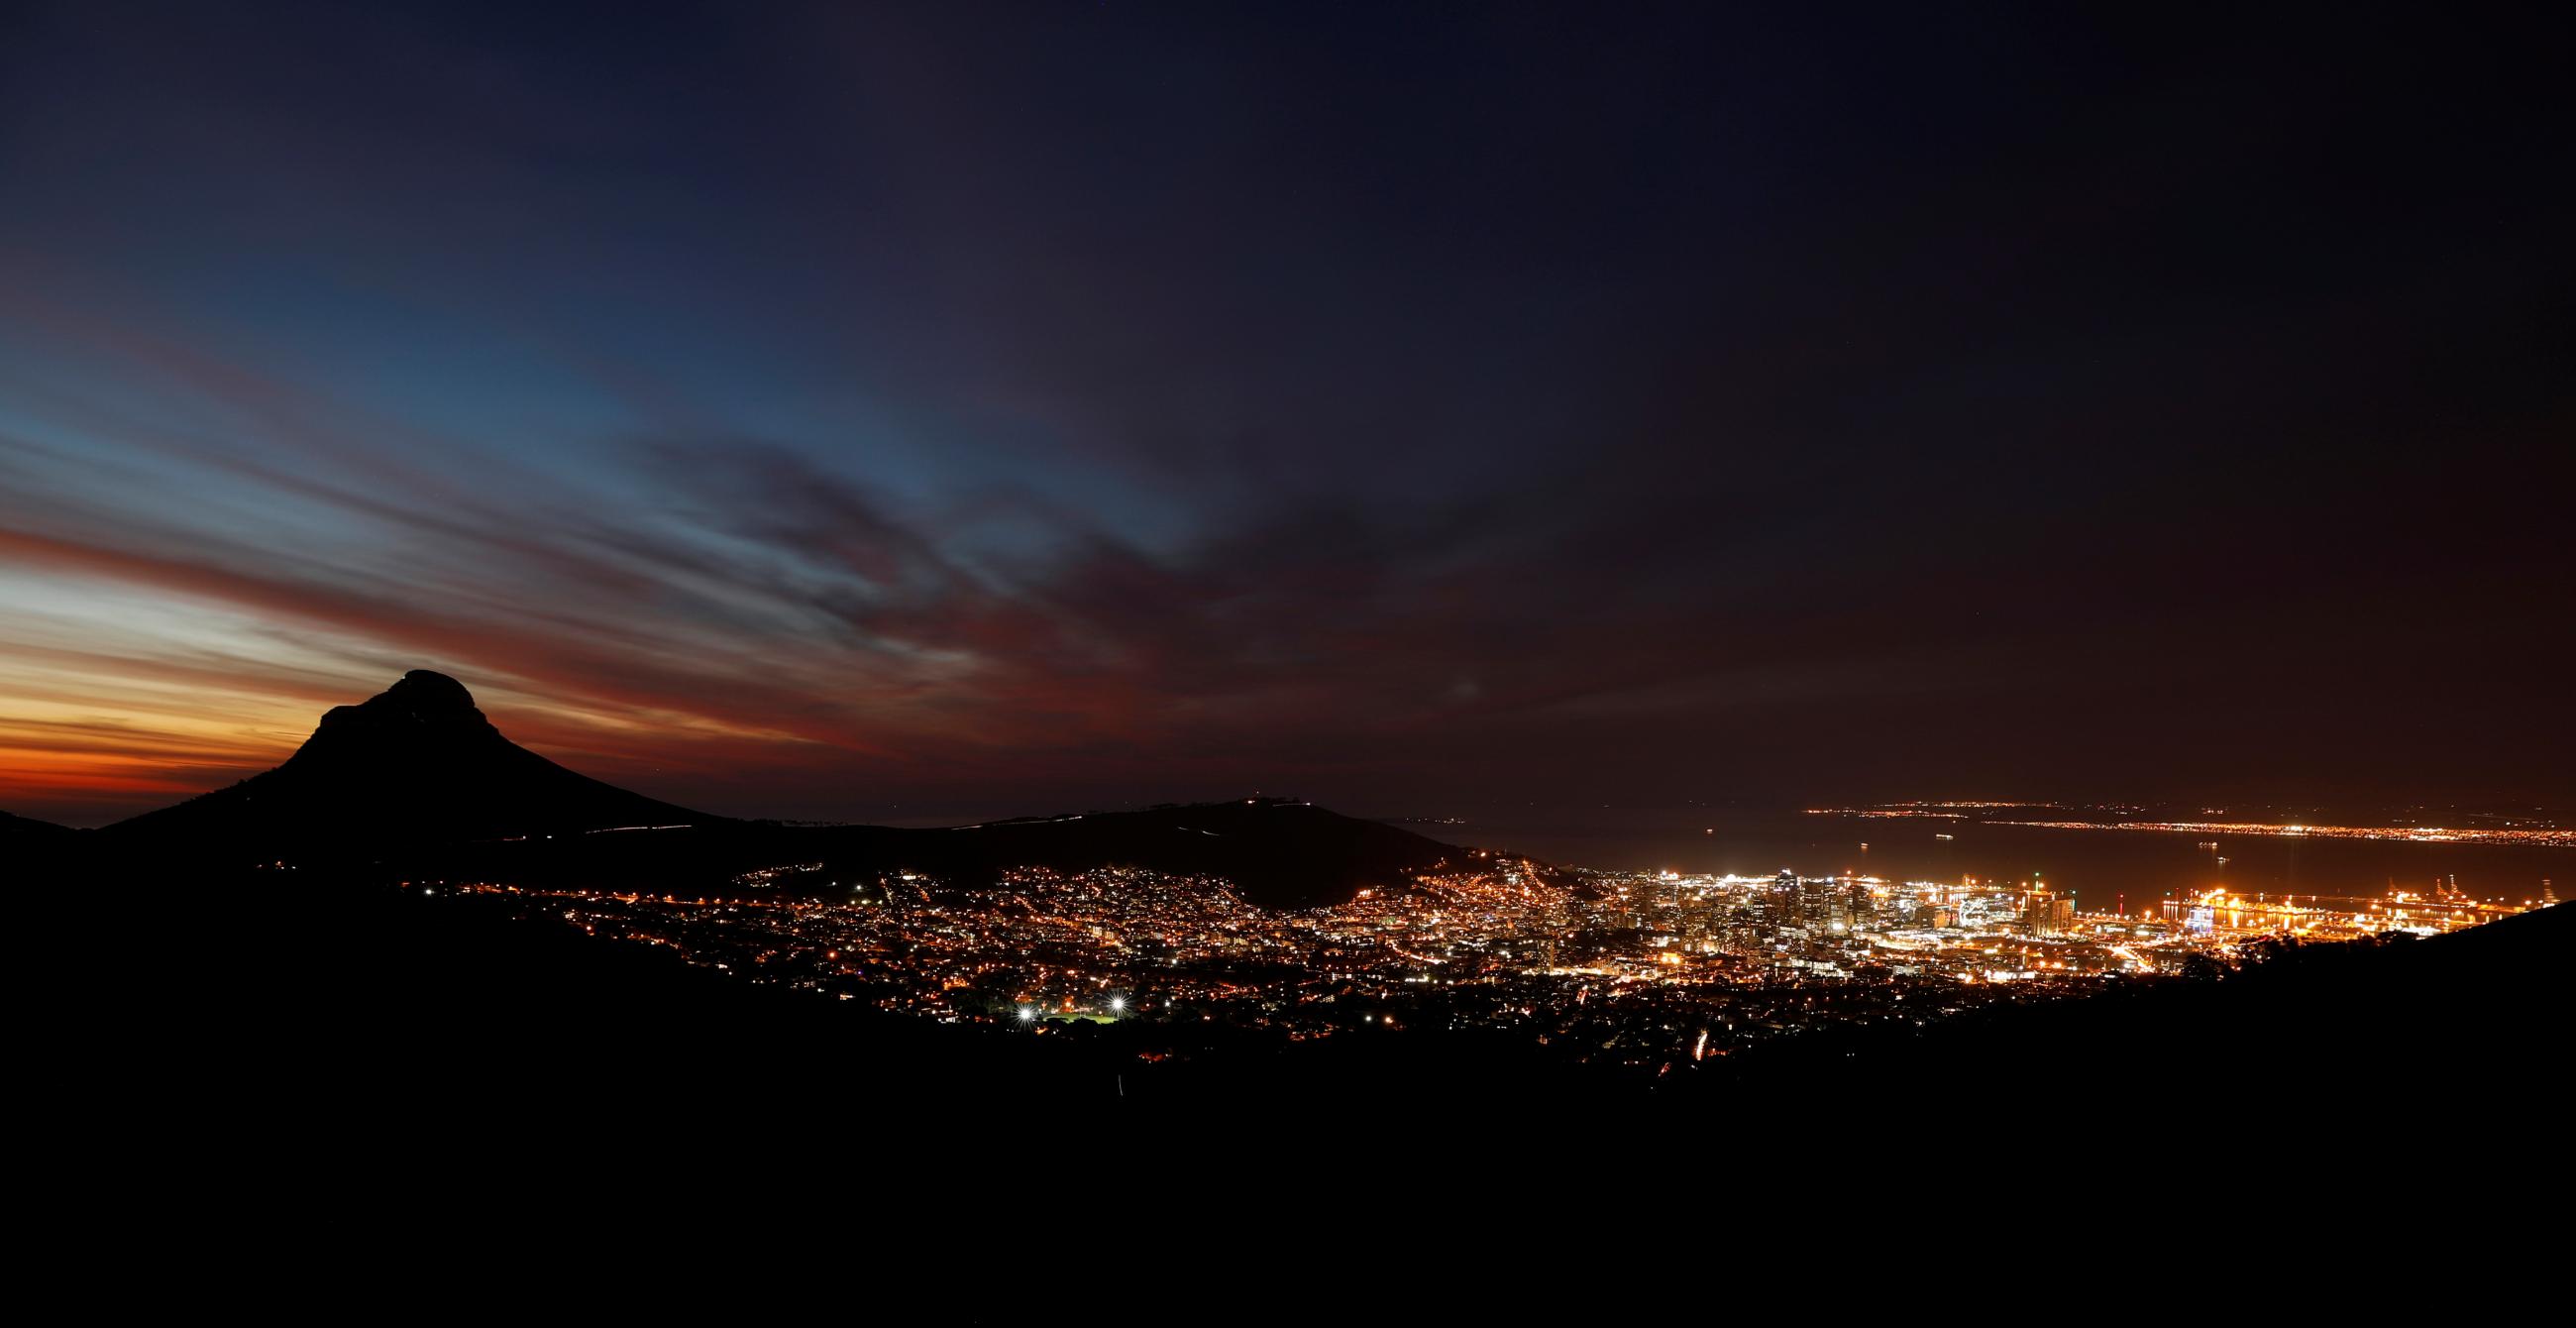 Electricity lights the city as the day's last light fades dark blue over Lion's Head mountain in Cape Town, South Africa, on June 18, 2019.